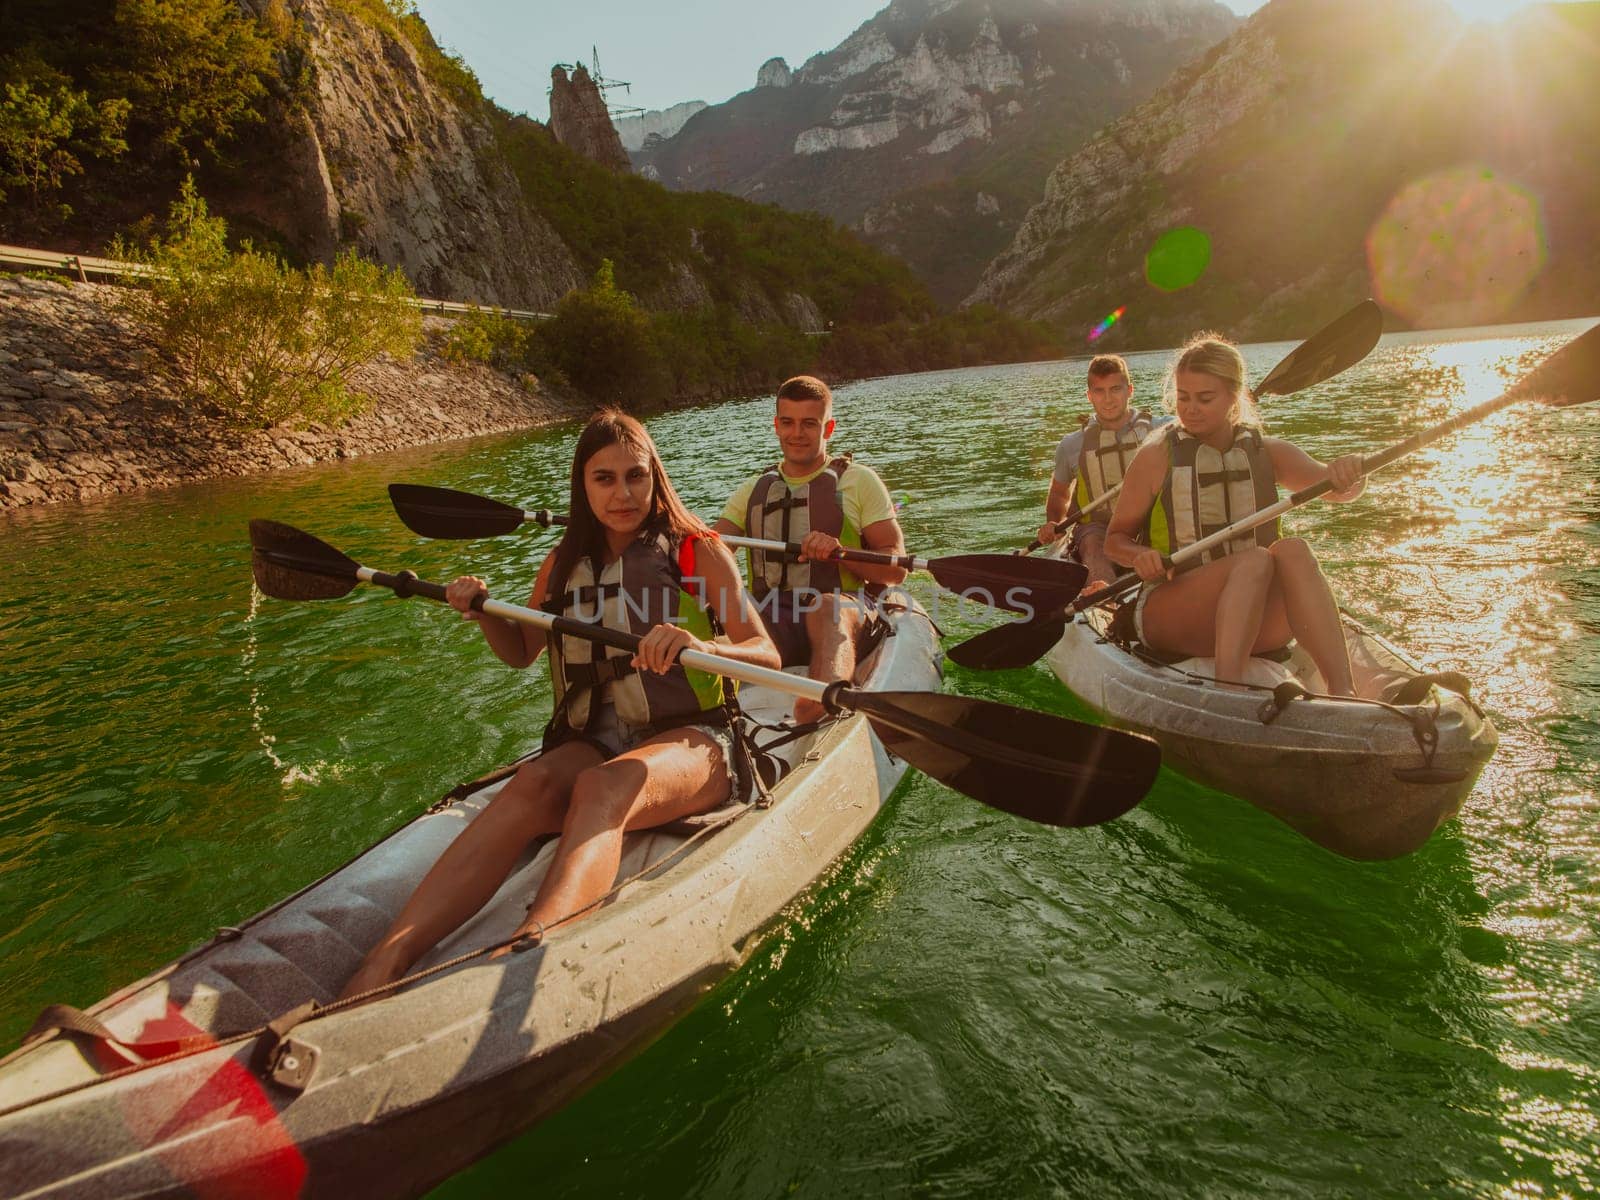 A group of friends enjoying fun and kayaking exploring the calm river, surrounding forest and large natural river canyons during an idyllic sunset. by dotshock